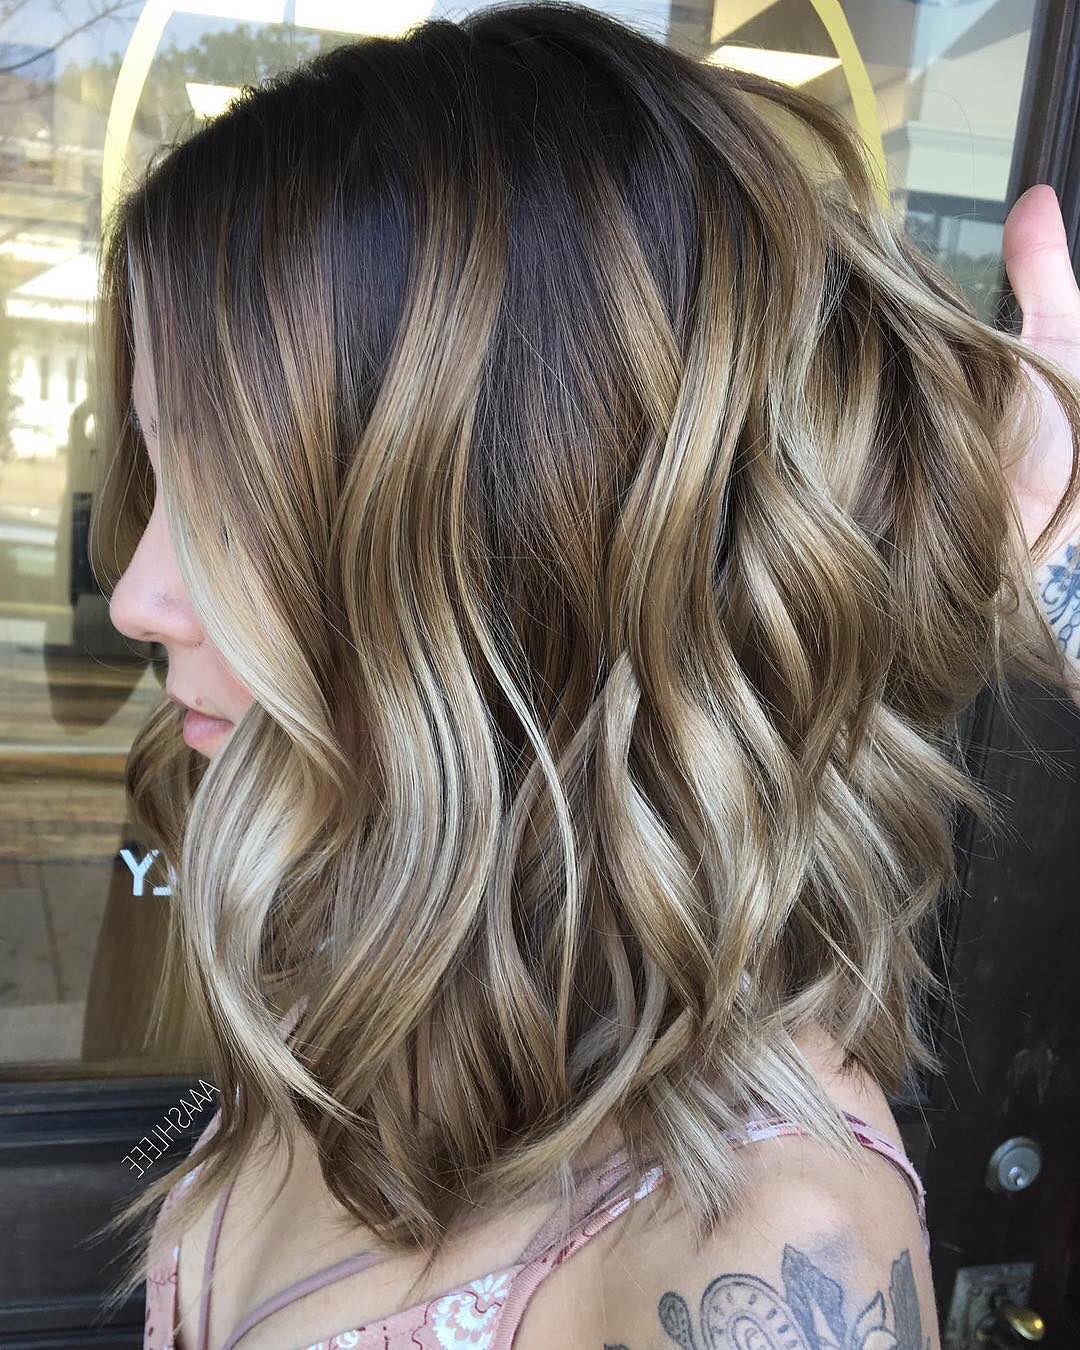 10 Balayage Ombre Hair Styles For Shoulder Length Hair